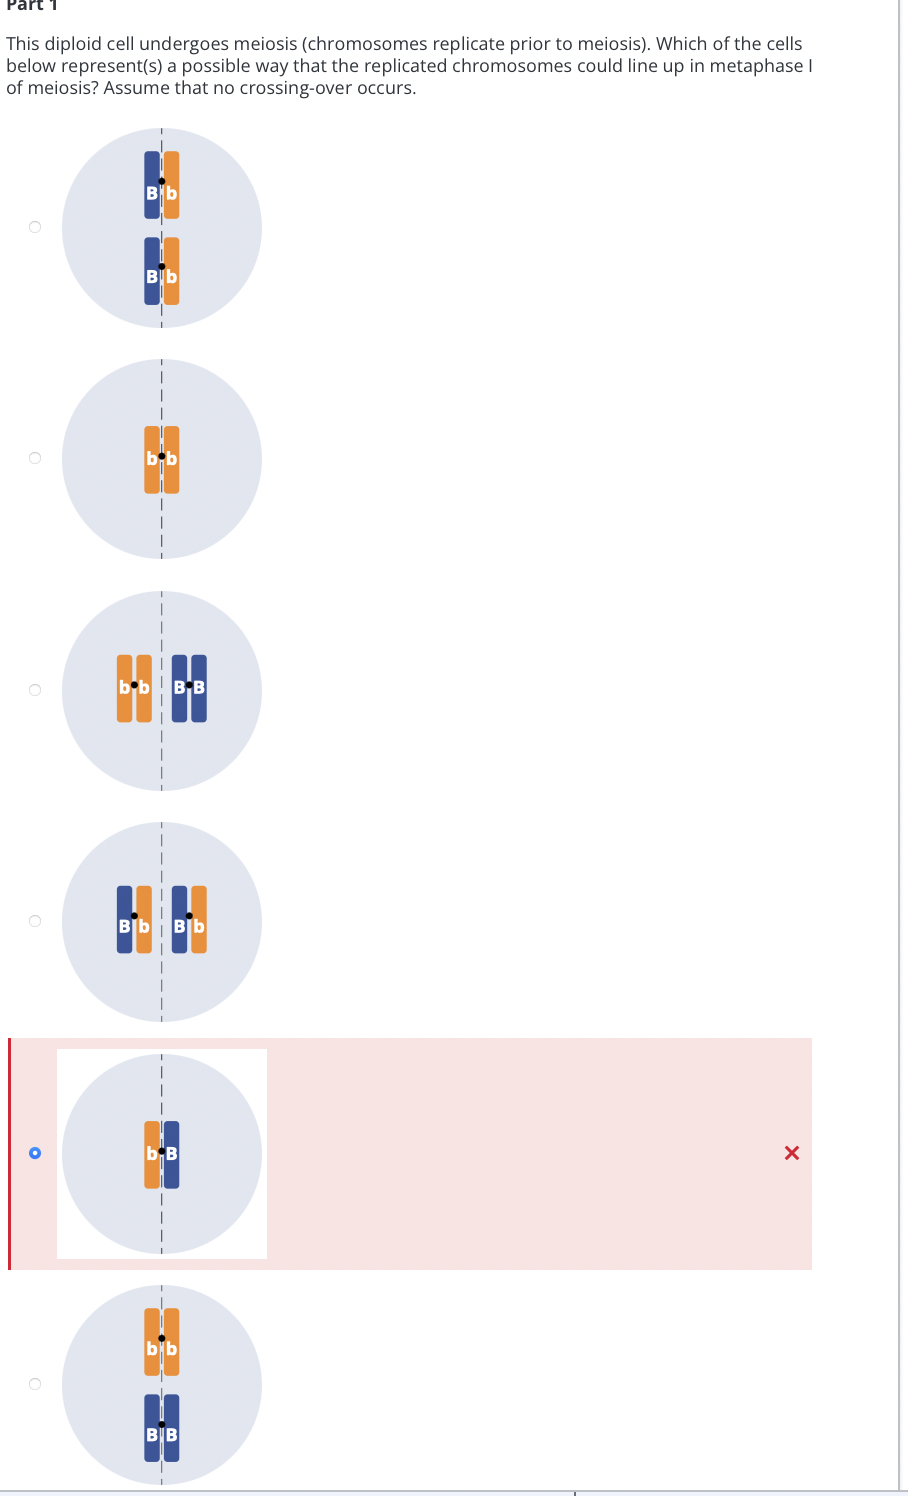 Part 1
This diploid cell undergoes meiosis (chromosomes replicate prior to meiosis). Which of the cells
below represent(s) a possible way that the replicated chromosomes could line up in metaphase I
of meiosis? Assume that no crossing-over occurs.
O
Bb
Bib
MP
bb BB
AF
Bb Bb
bB
bib
BB
X